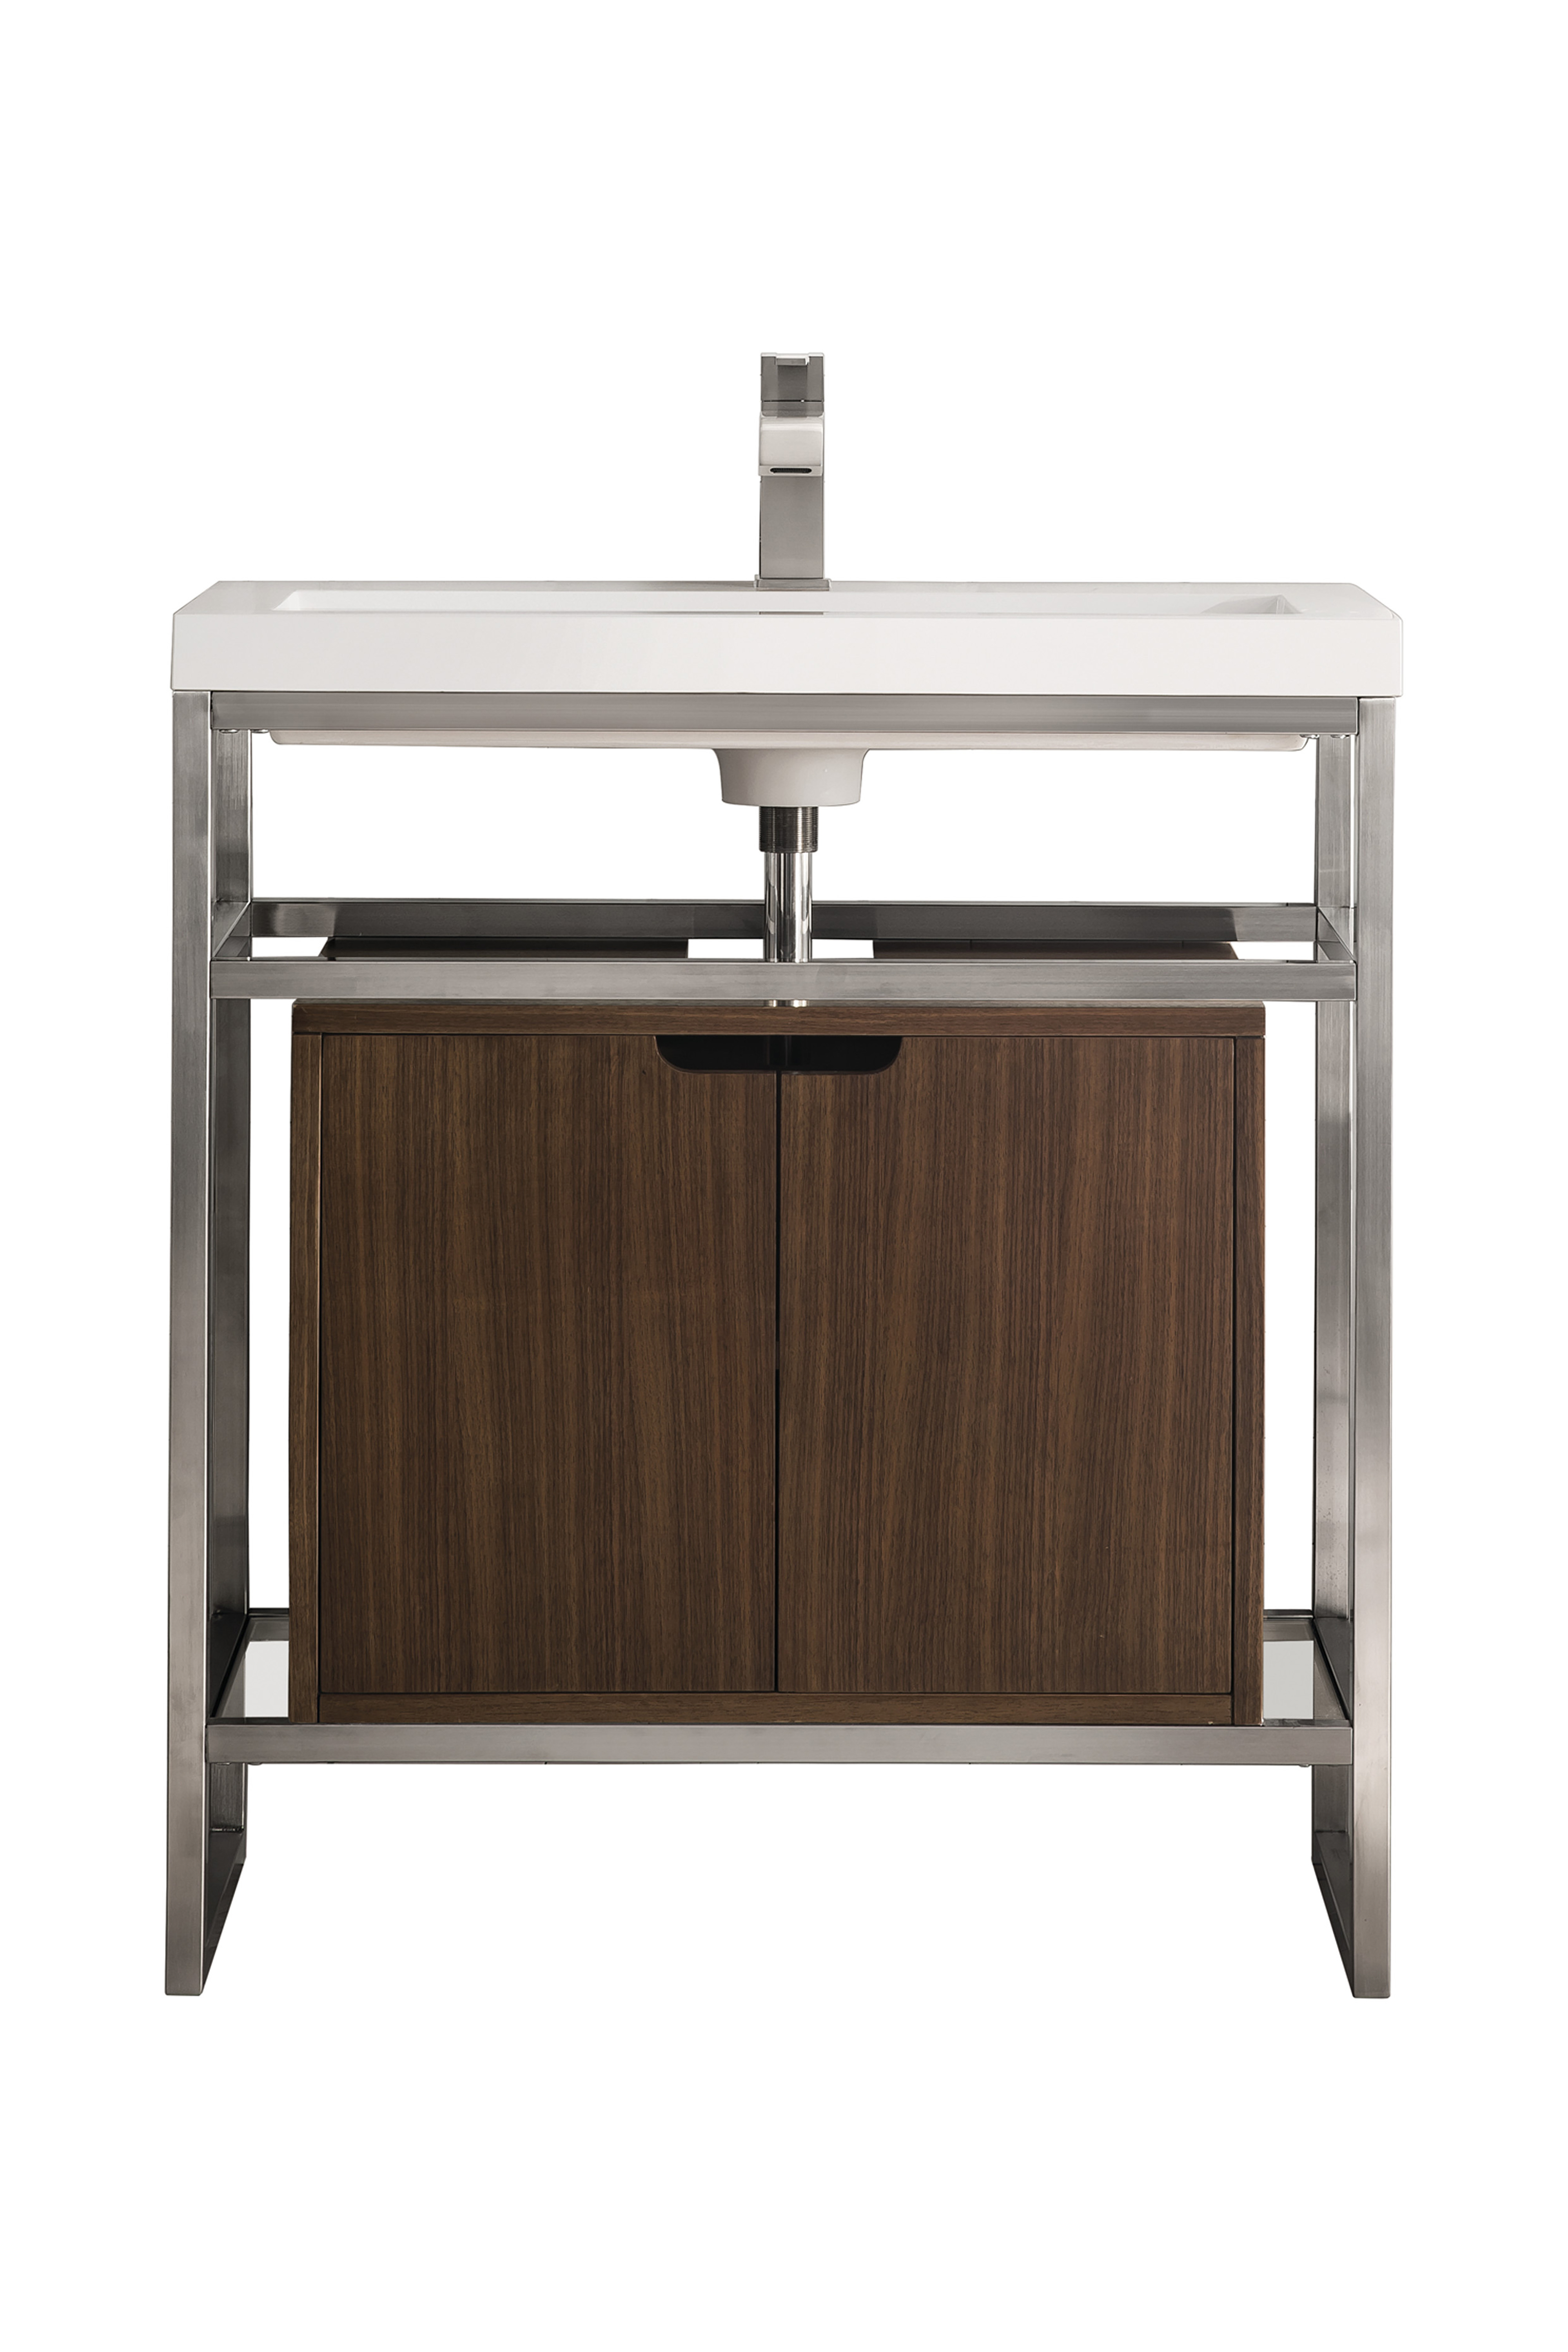 James Martin C105V31.5BNKSCWLTWG Boston 31.5" Stainless Steel Sink Console, Brushed Nickel w/ Mid Century Walnut Storage Cabinet, White Glossy Composite Countertop